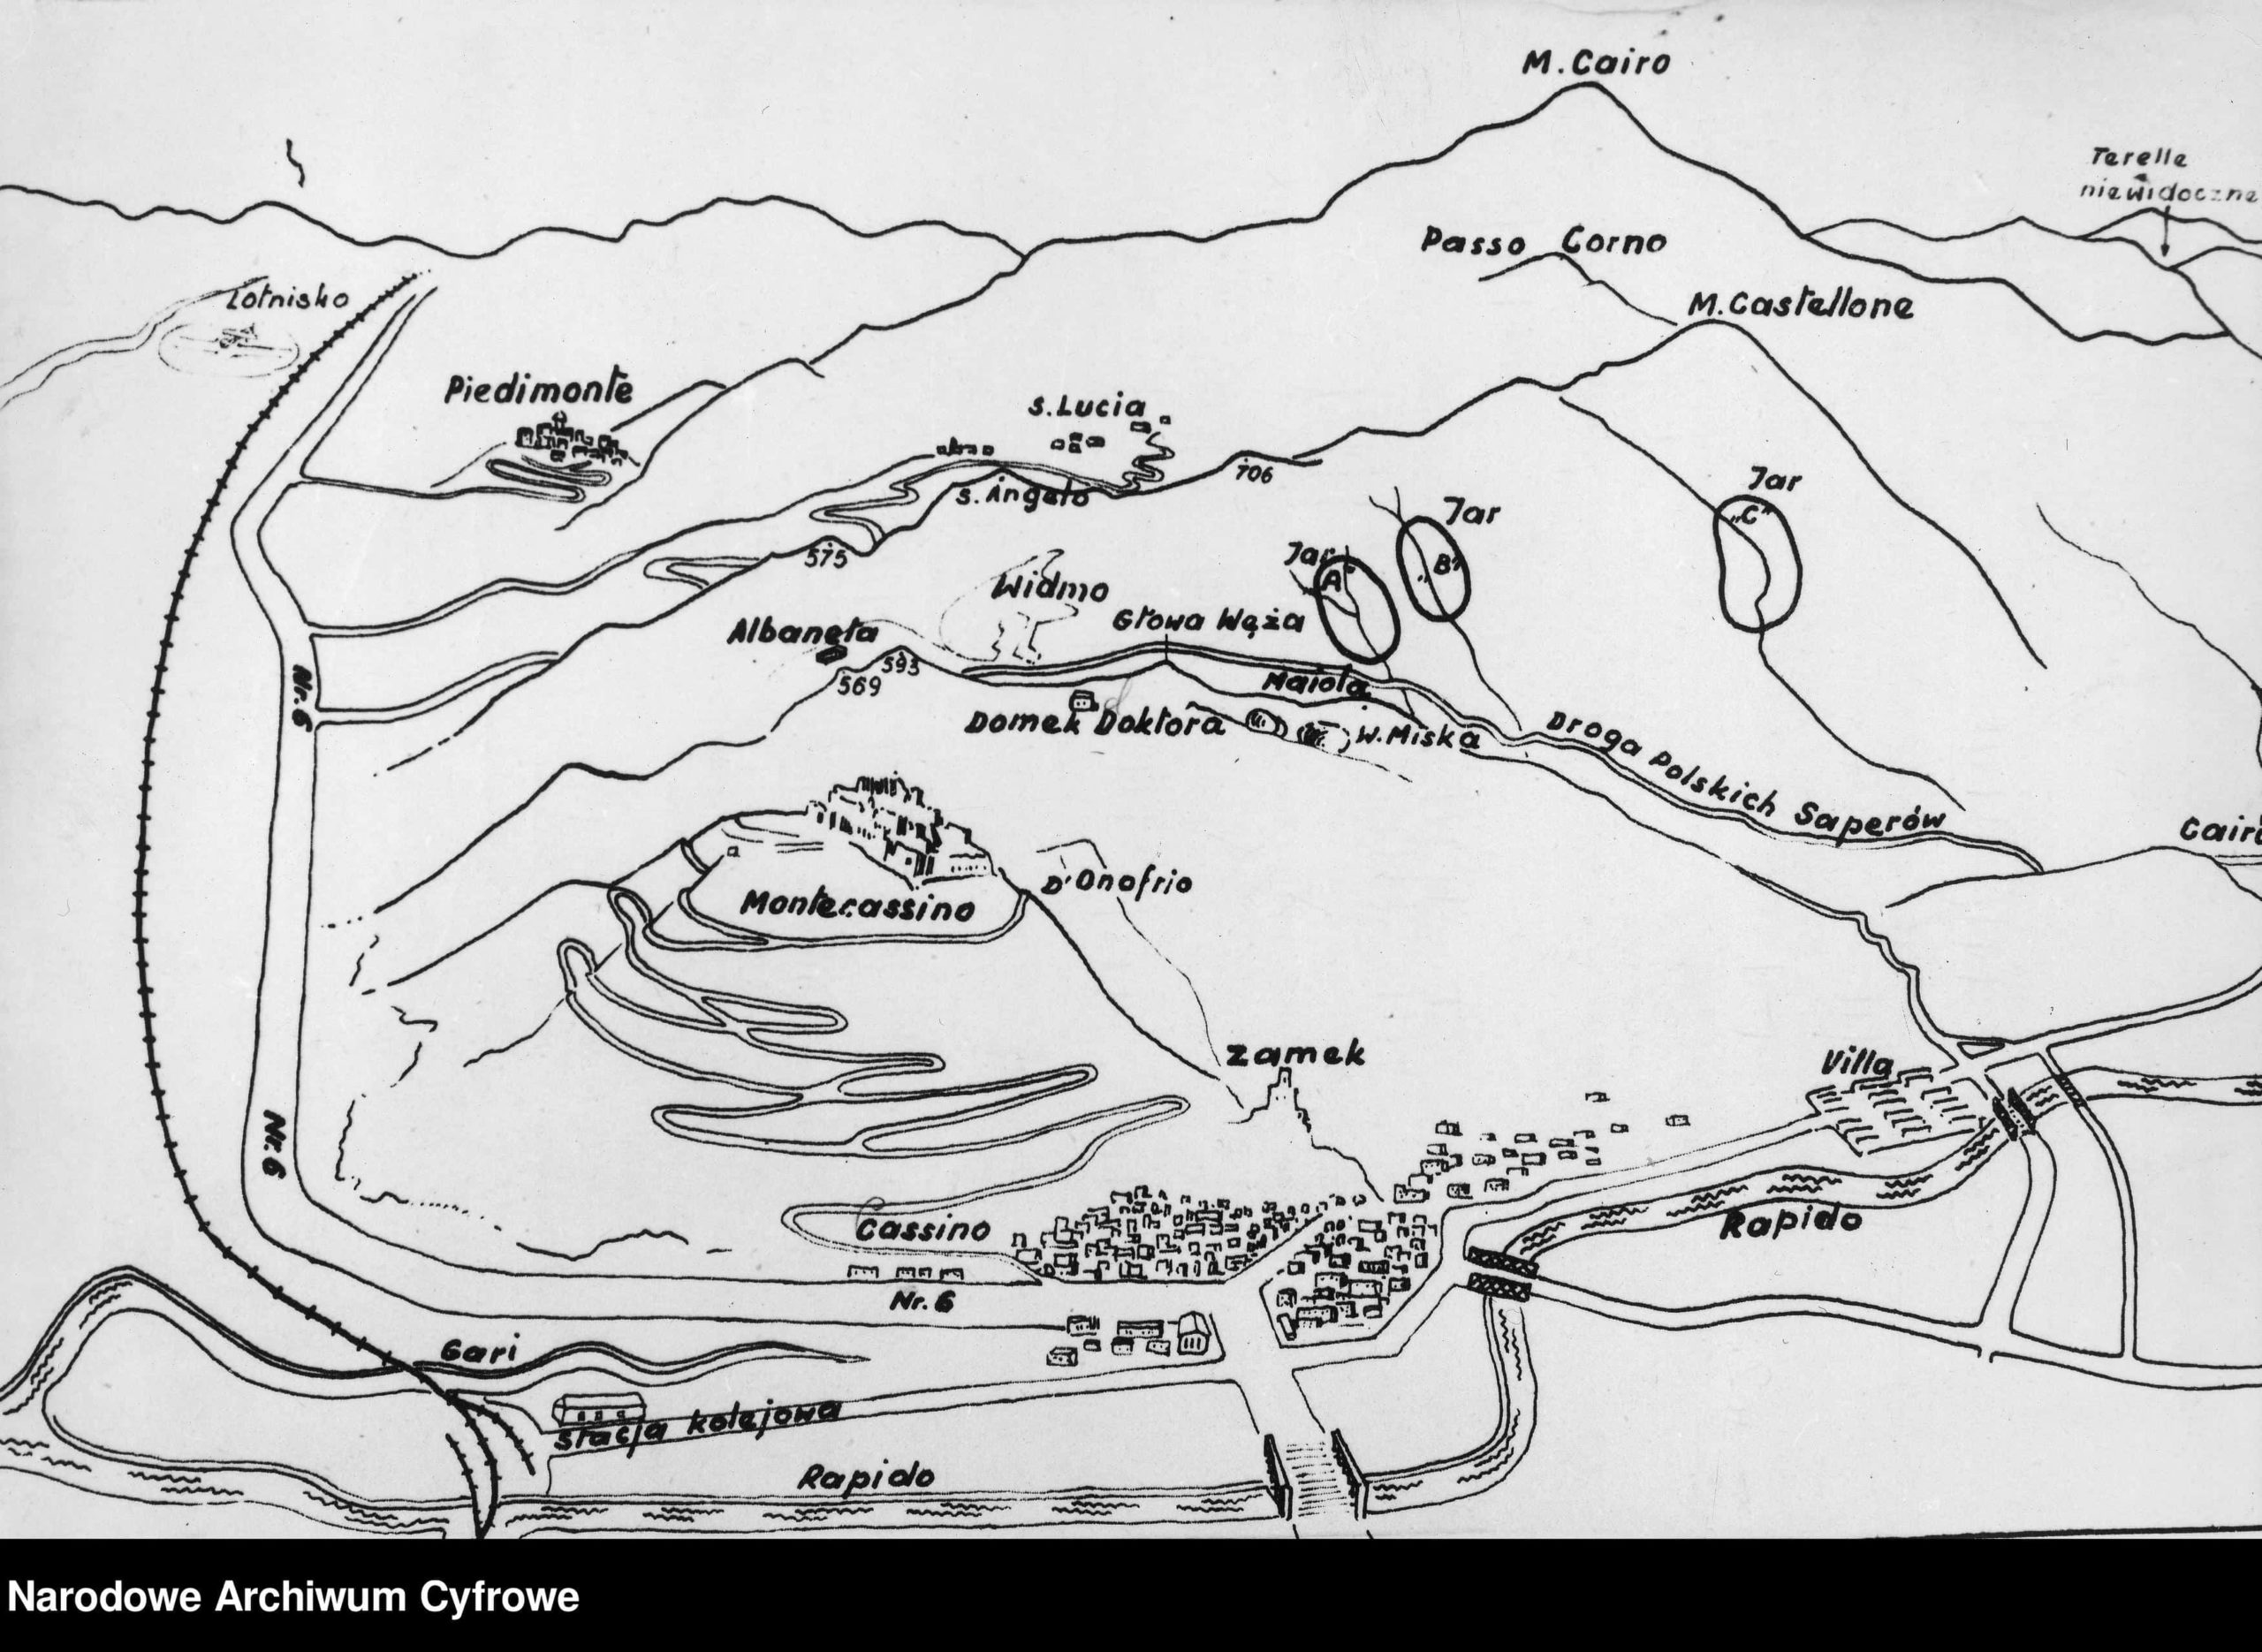 Monte Cassino battlefield on a situational sketch. From the collection of the National Digital Archive (NAC).